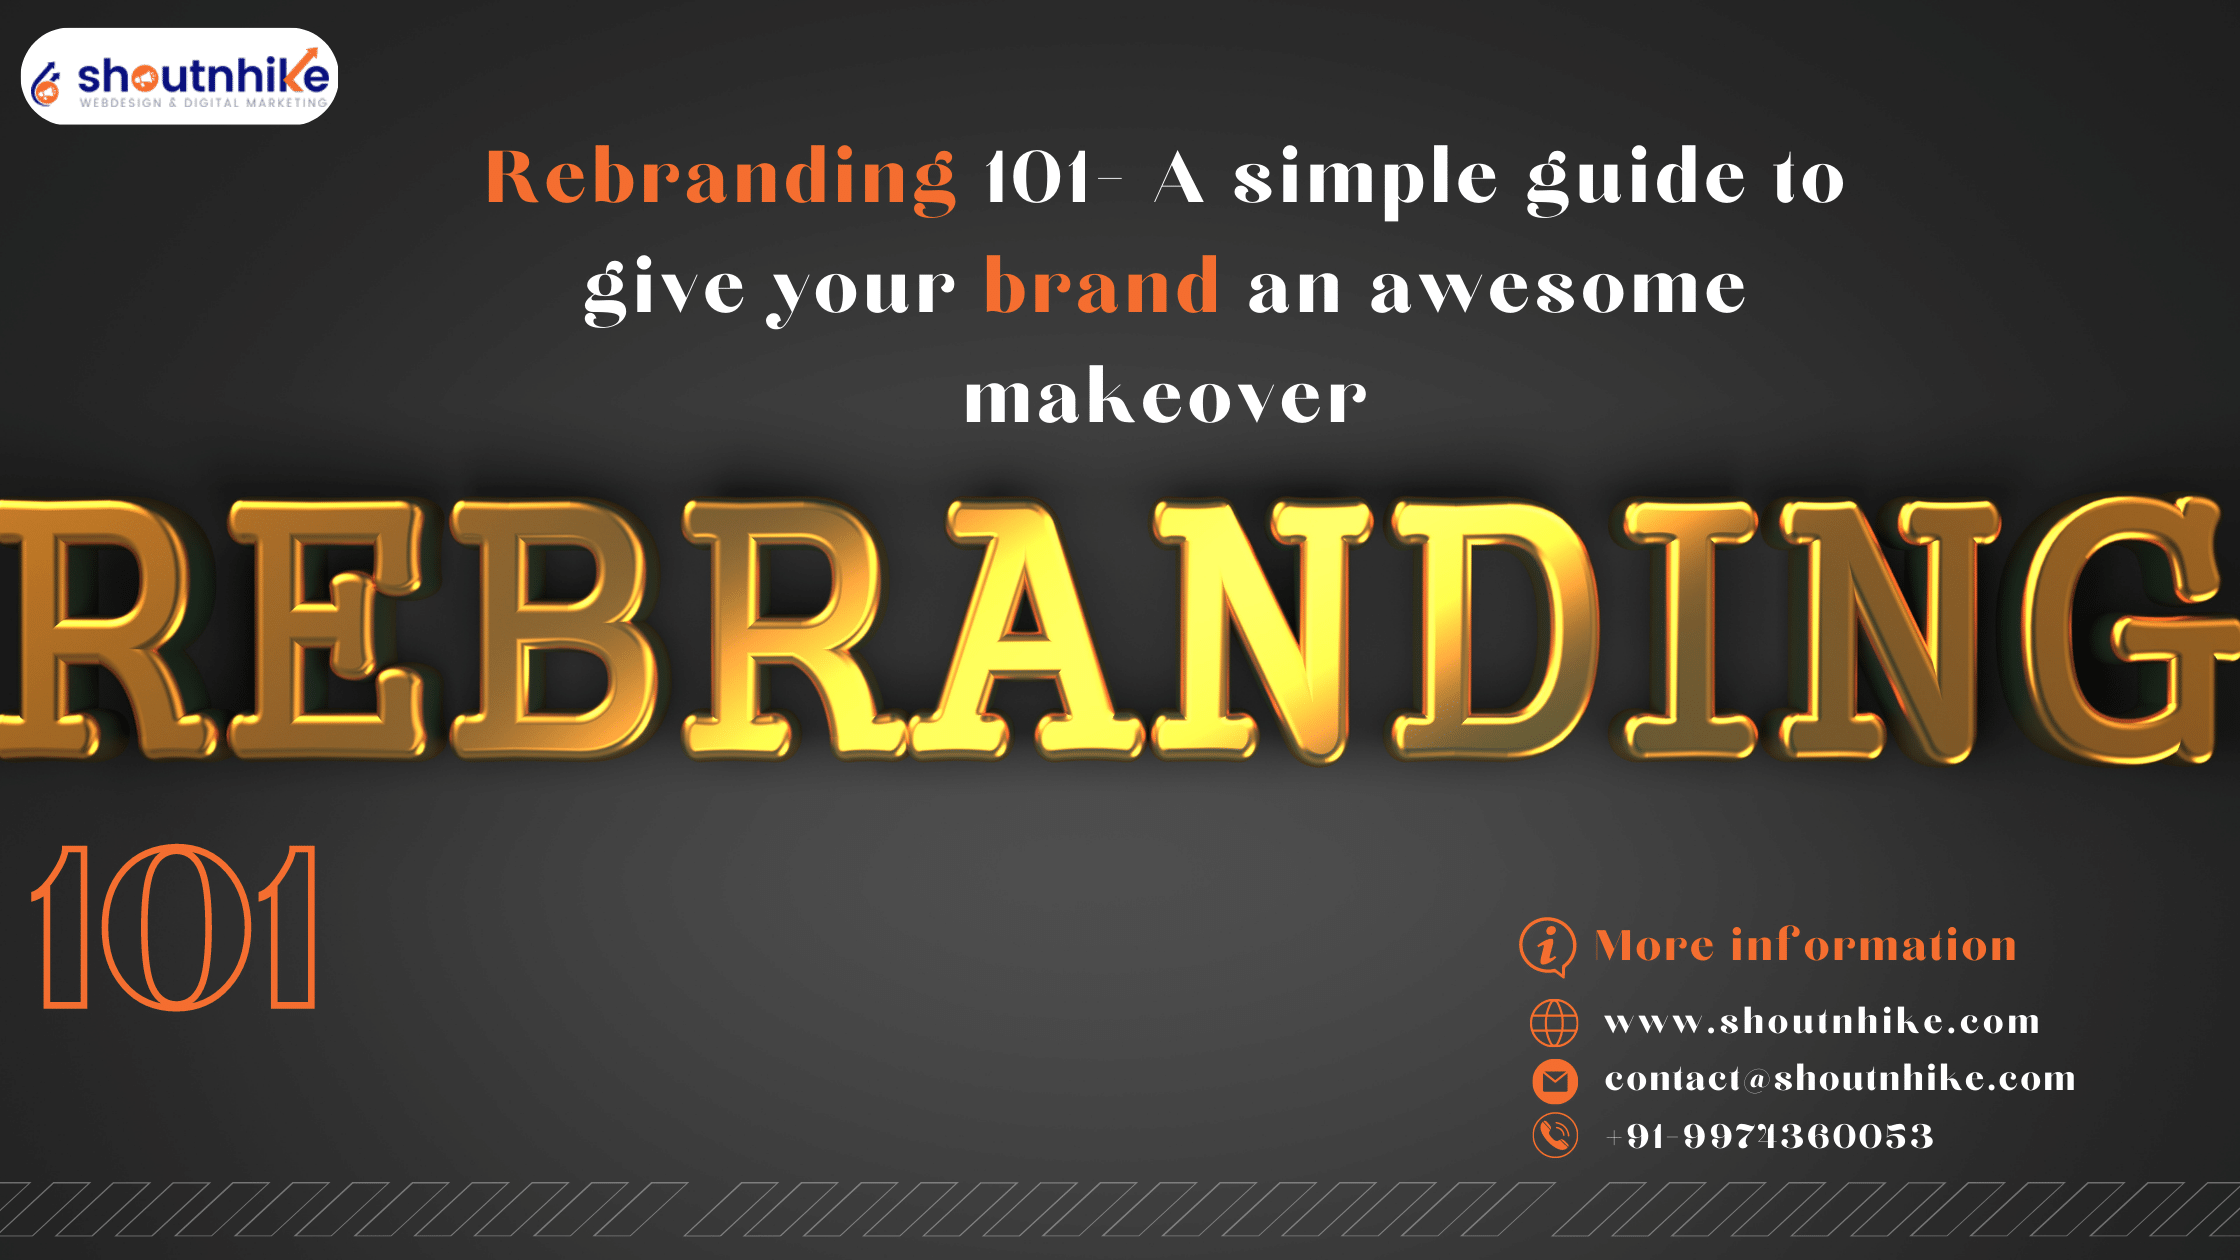 Rebranding 101- A simple guide to give your brand an awesome makeover